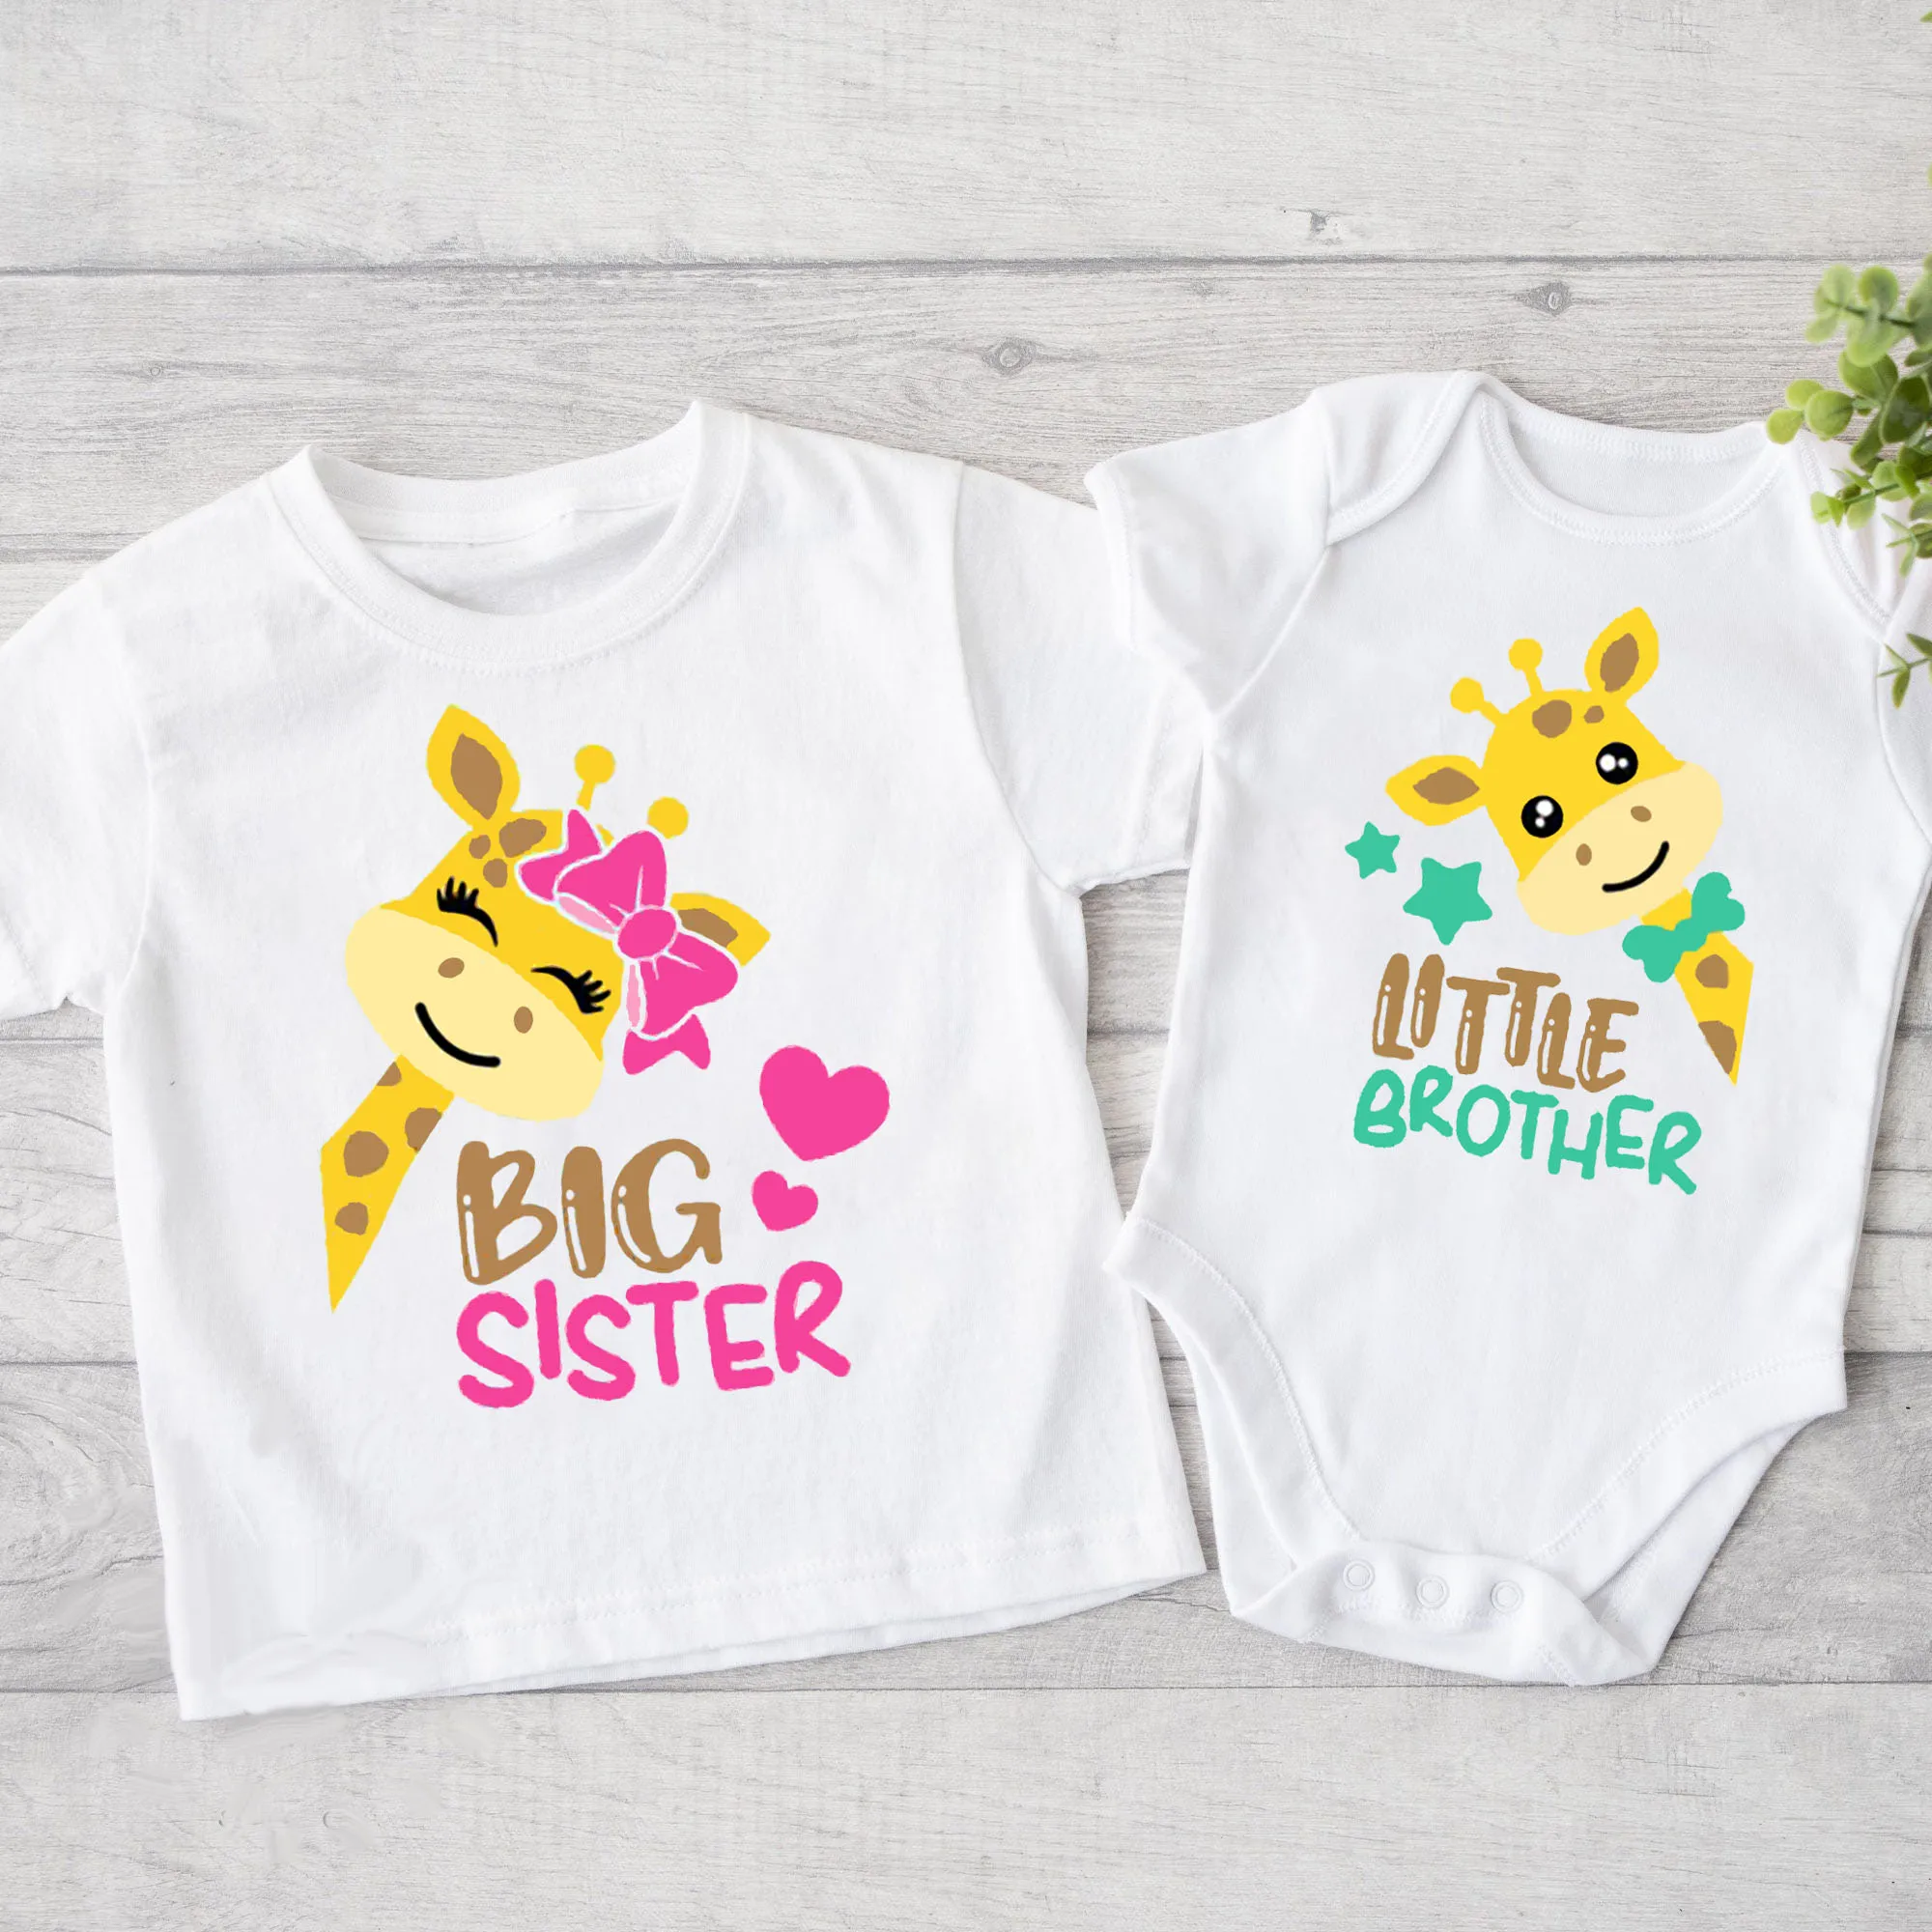 

Big Sister Little Brother Family Matching Clothes Giraffe Print Boys Girls T-shirt Toddler Romper KidsTops Short Sleeve Outfits